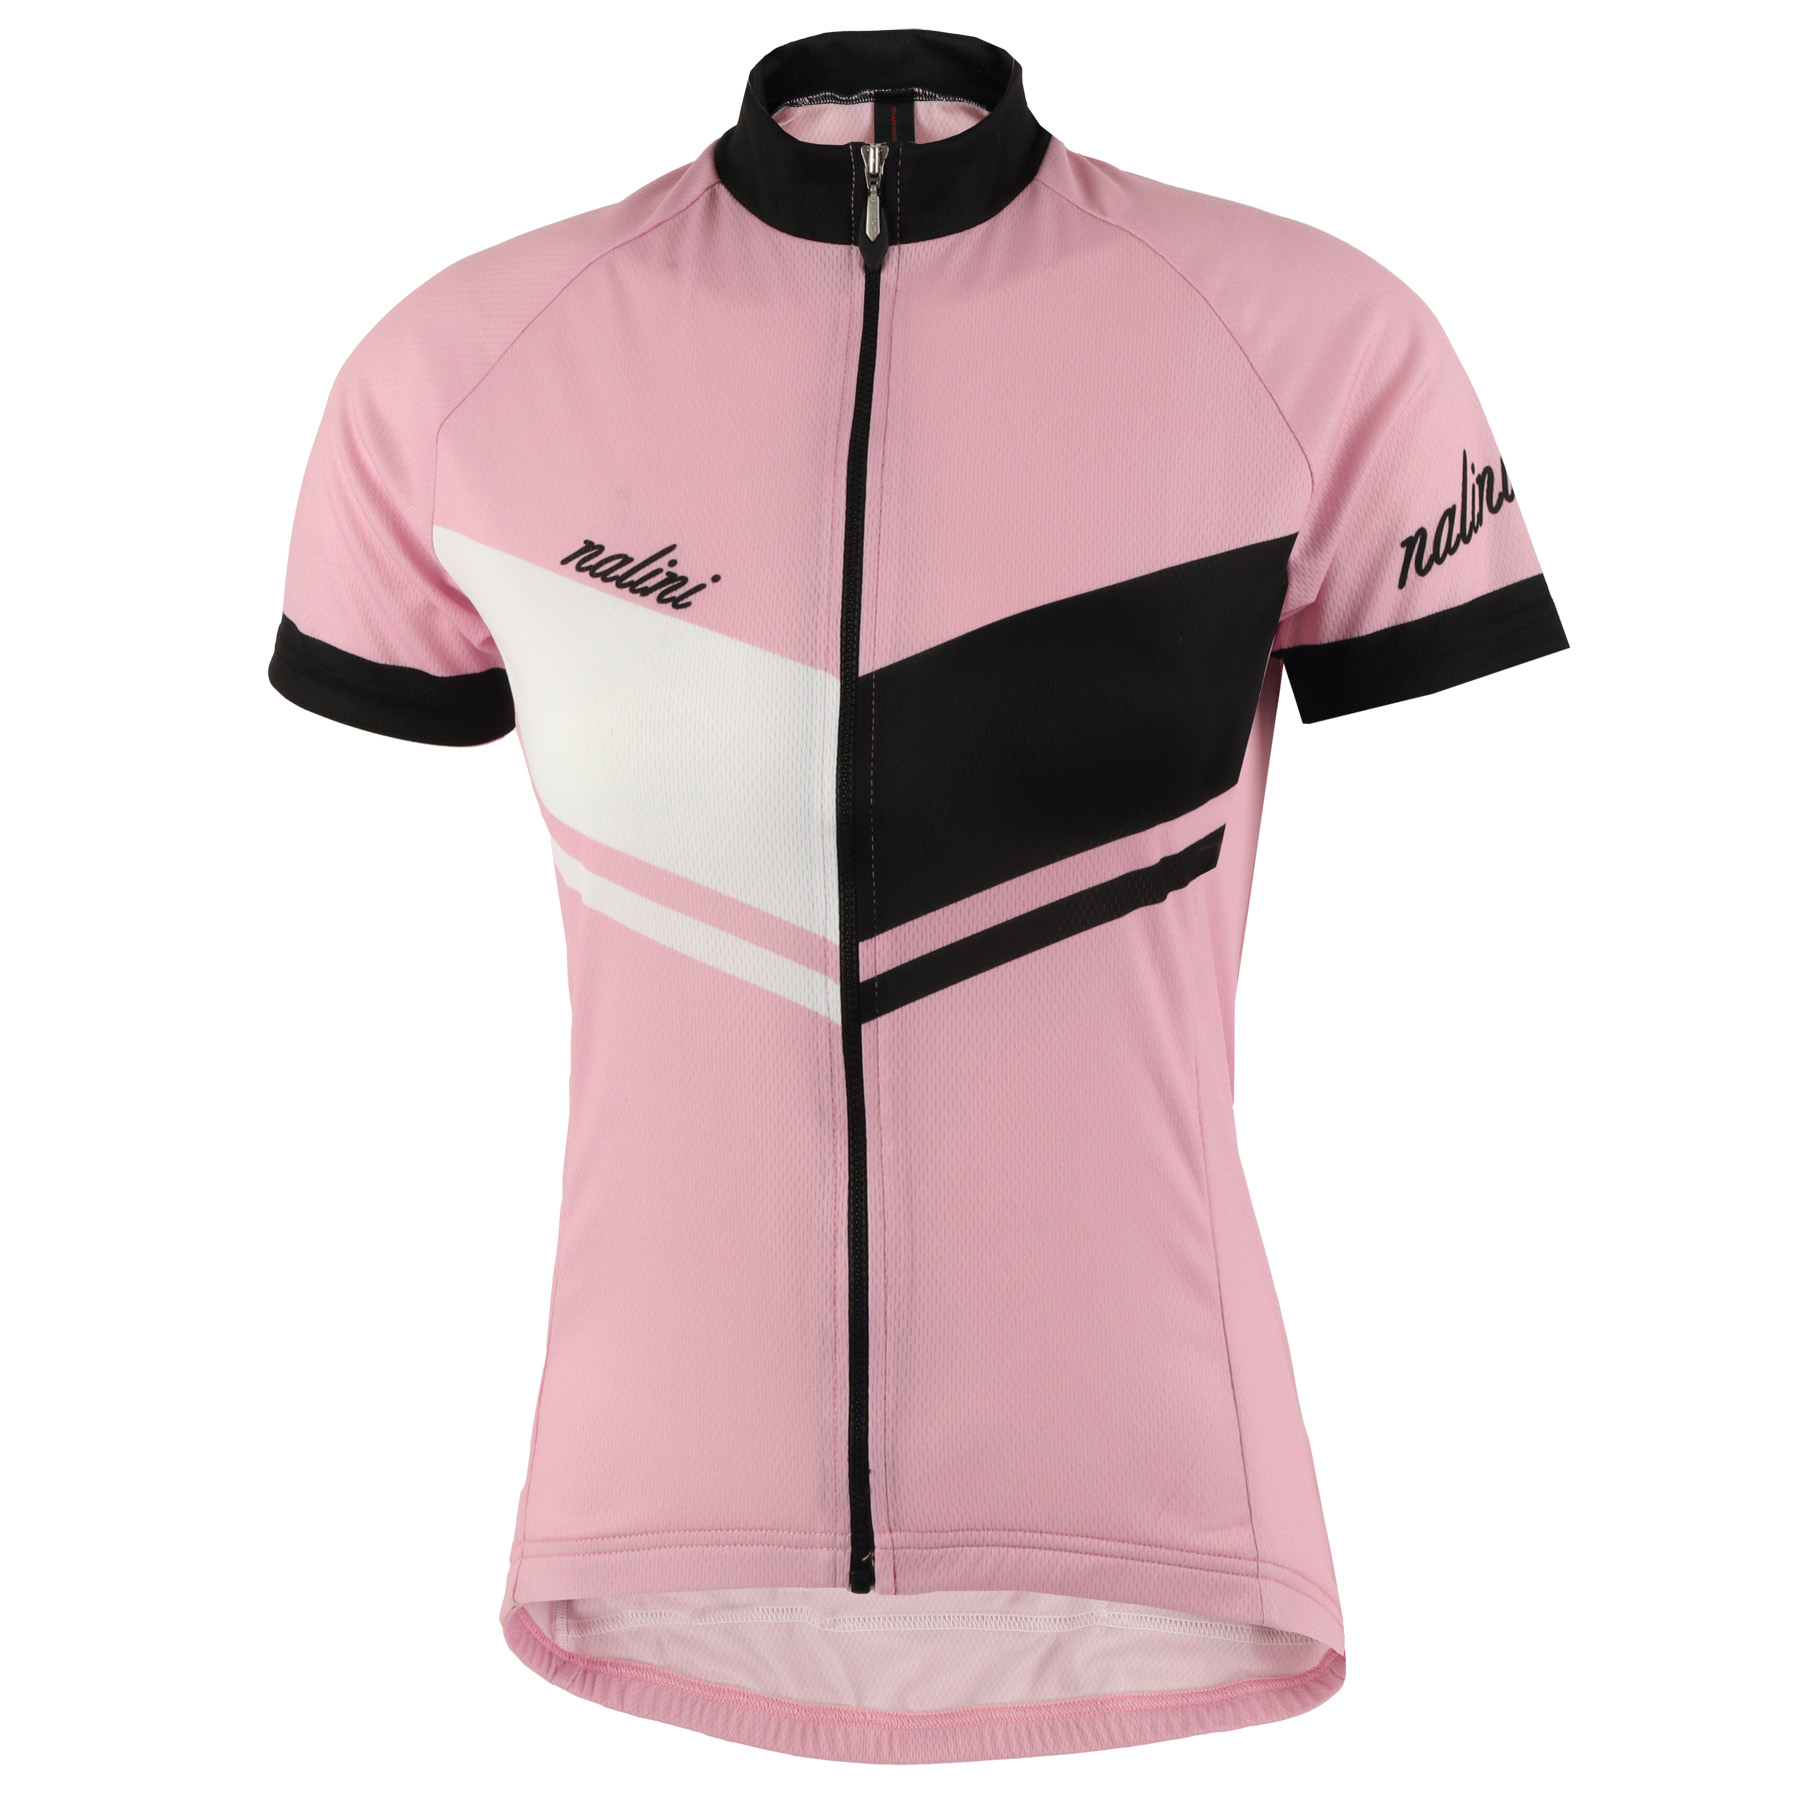 Picture of Nalini Fabulosa Lady Short Sleeve Jersey - rosé 5600